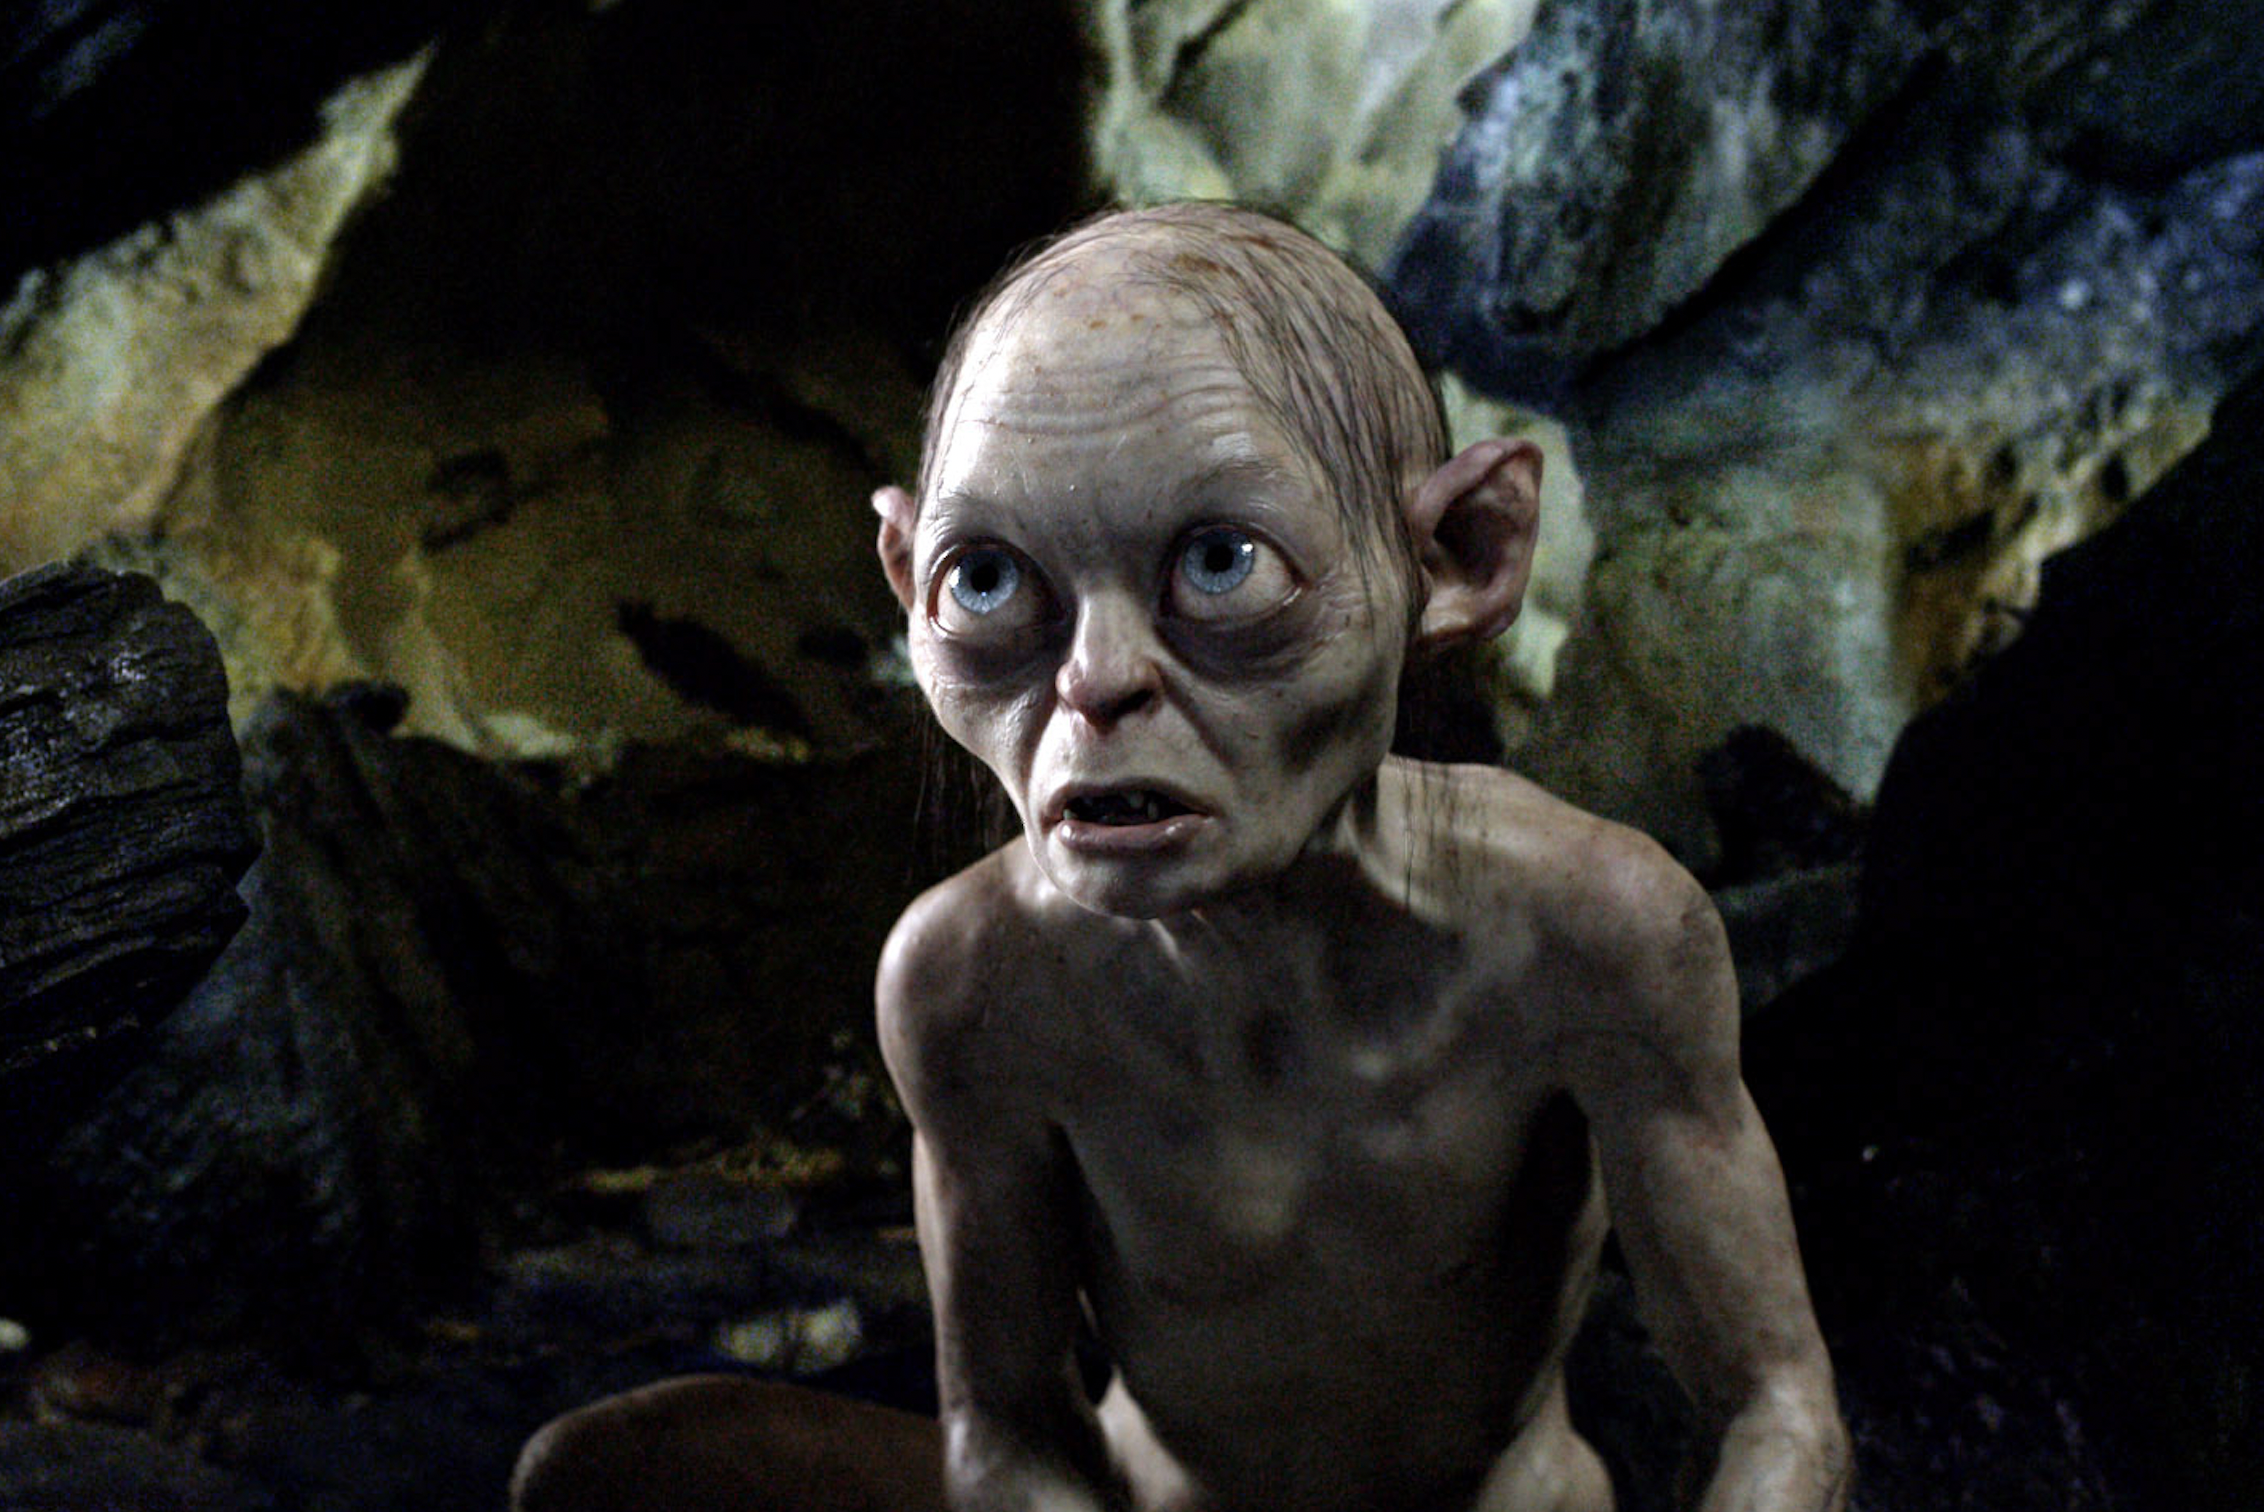 ...Gollum’ Fan Film Restored Online After It Got Blocked Following...Warner Bros.’ New ‘Lord of the Rings’ Movie Announcement